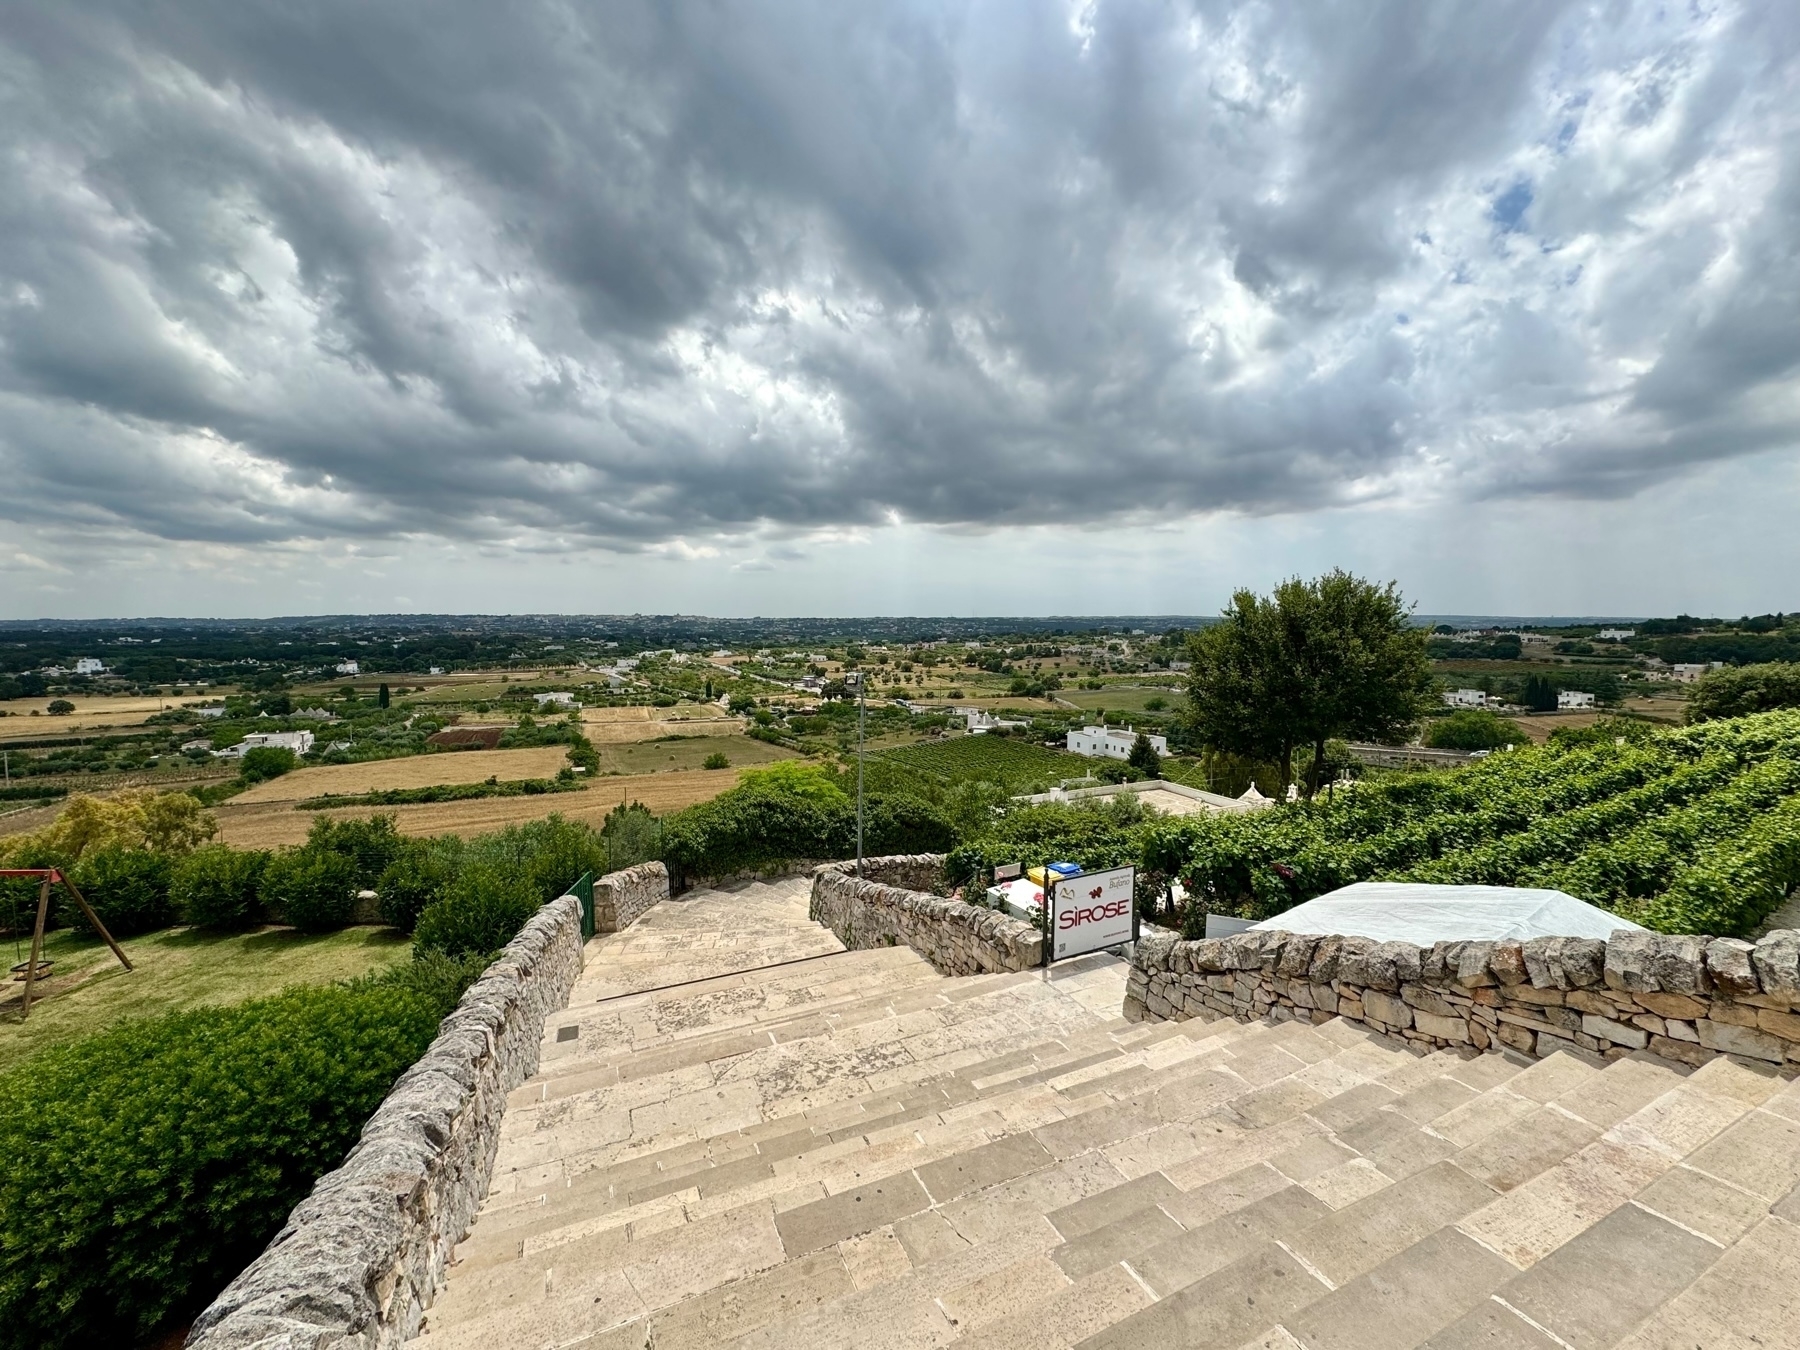 A panoramic view of a countryside landscape taken from a stone staircase. The image features cloudy skies, green vineyards, farmland, and scattered buildings surrounded by vegetation. A sign reading “SIROSE” is visible near the bottom of the stairs.